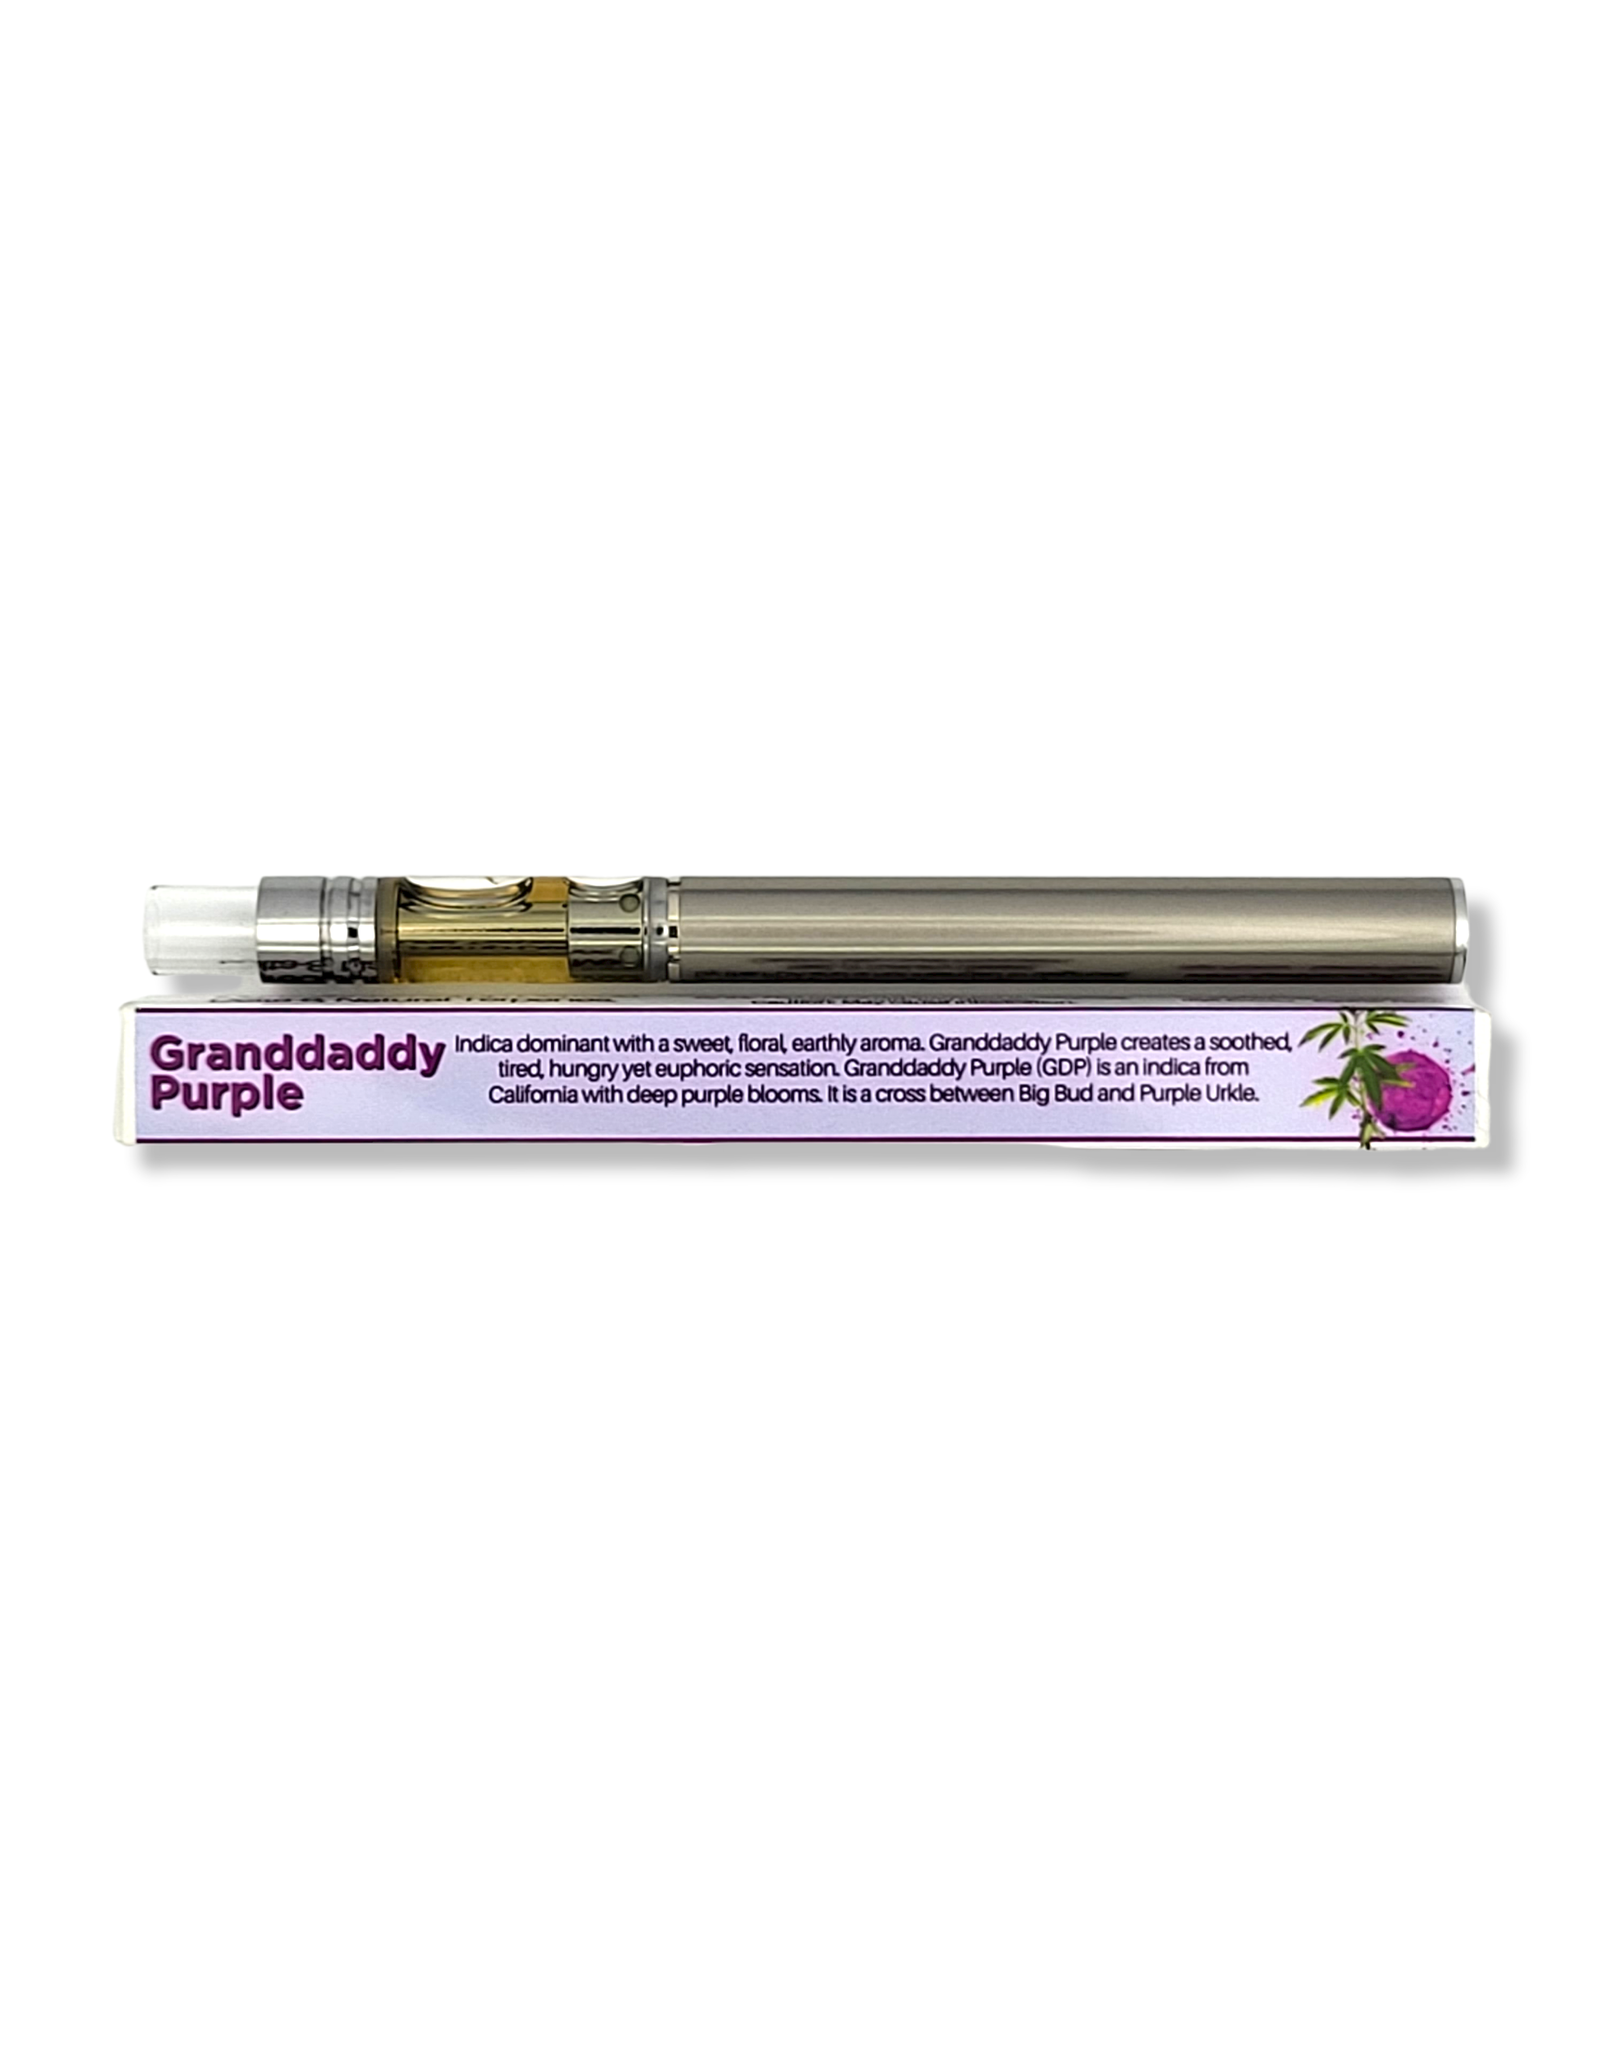 Apothecary Rx Apothecary Rx Delta 8 Granddaddy Purple Indica Disposable Cartridge 1gr